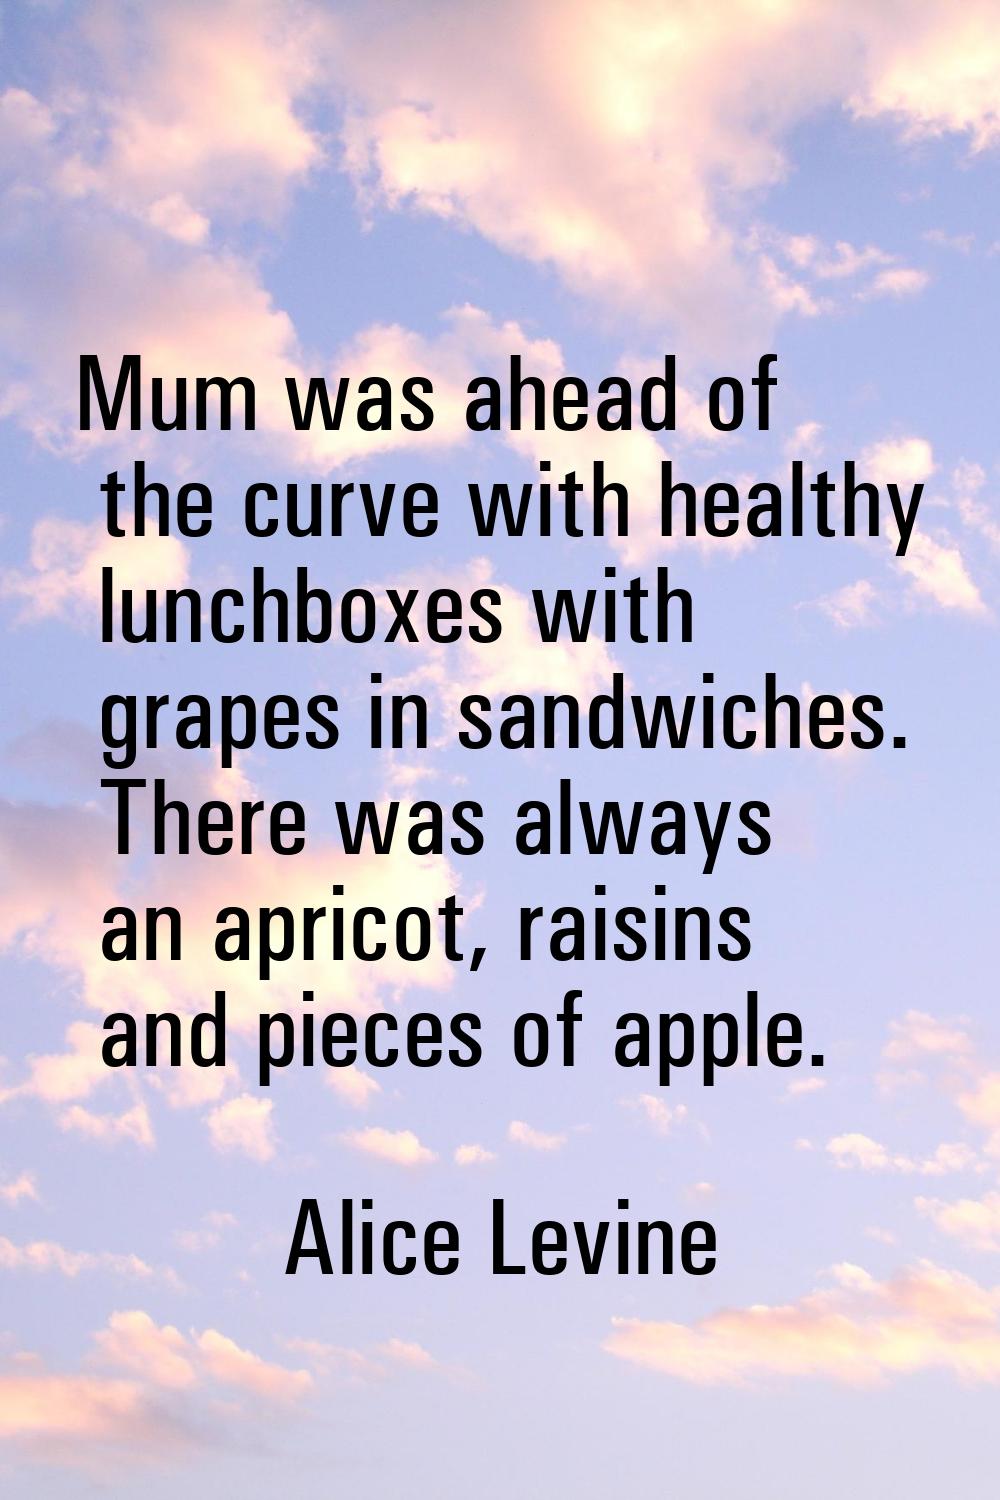 Mum was ahead of the curve with healthy lunchboxes with grapes in sandwiches. There was always an a